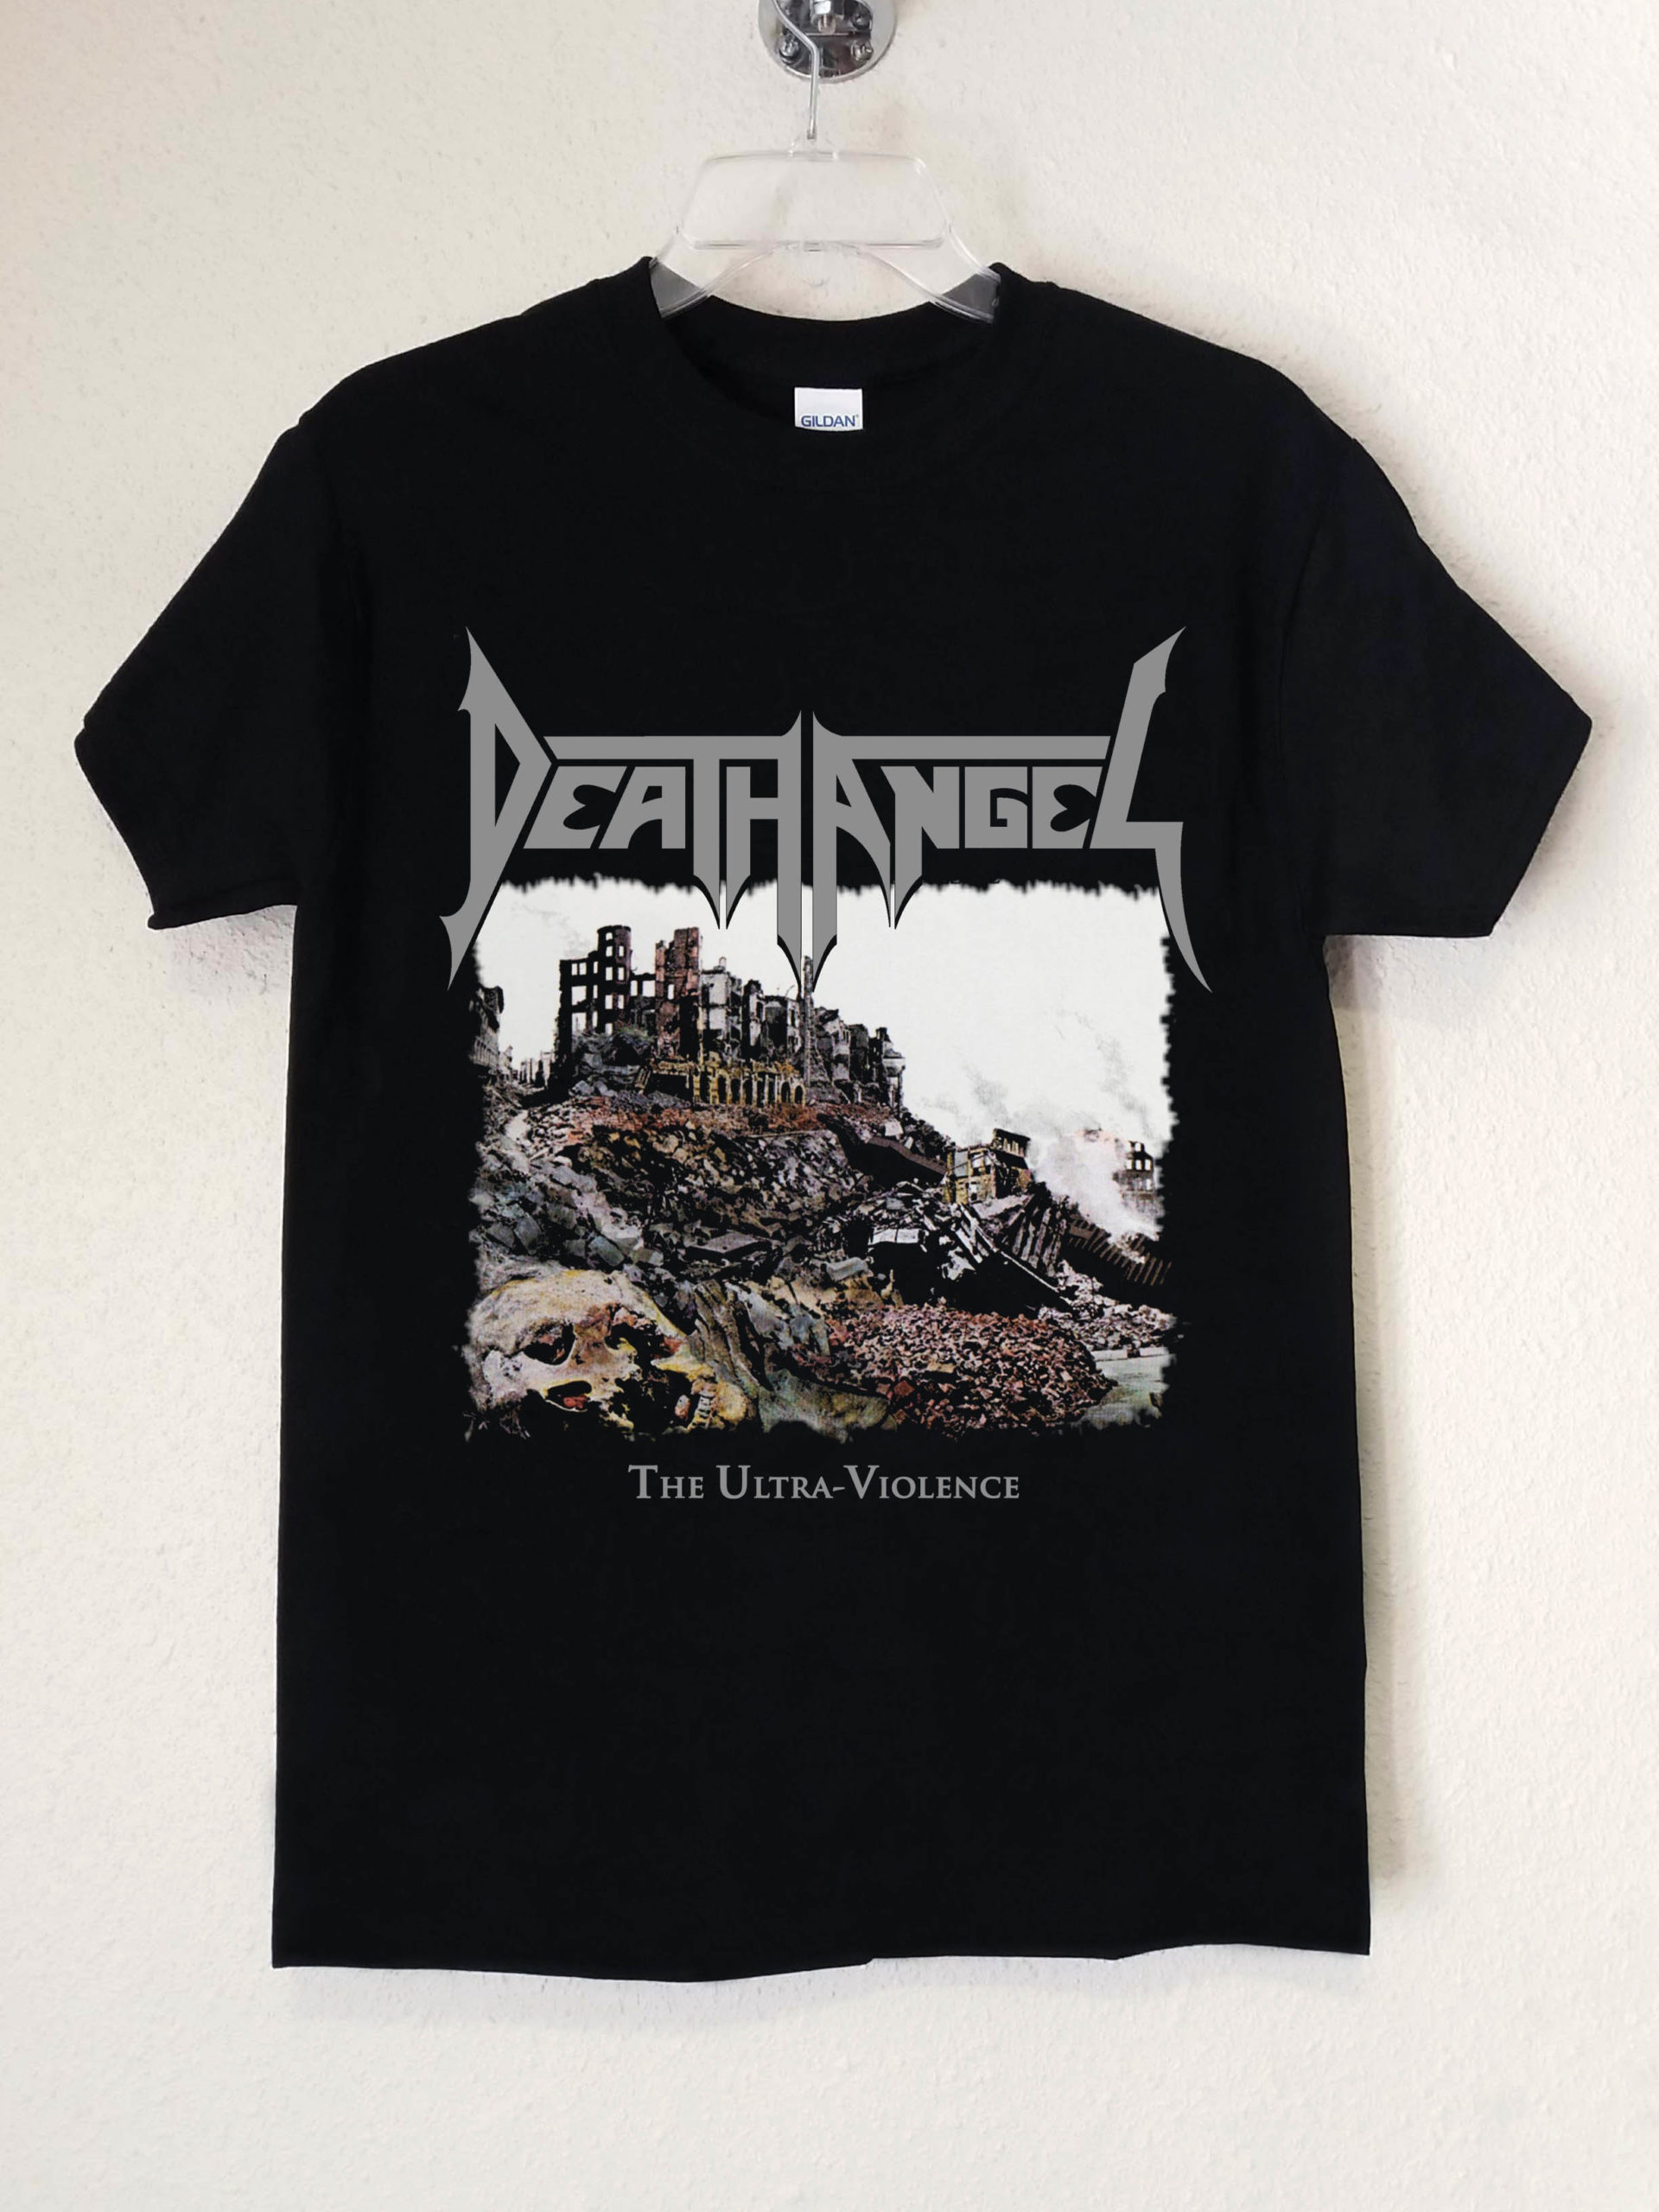 death angel the ultra violence